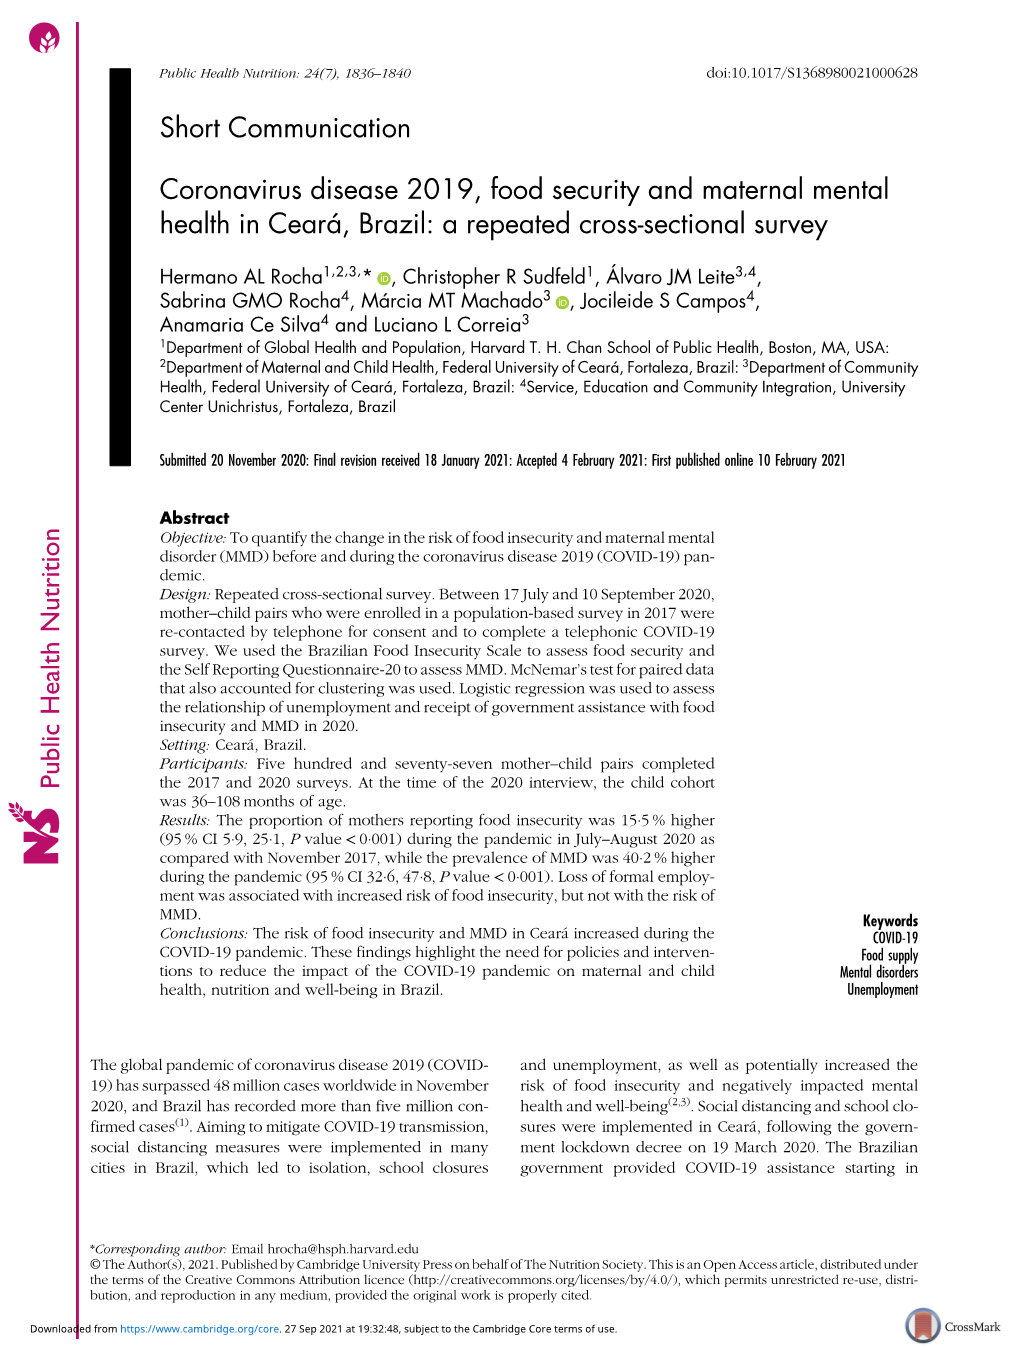 Coronavirus Disease 2019, Food Security and Maternal Mental Health in Ceará, Brazil: a Repeated Cross-Sectional Survey